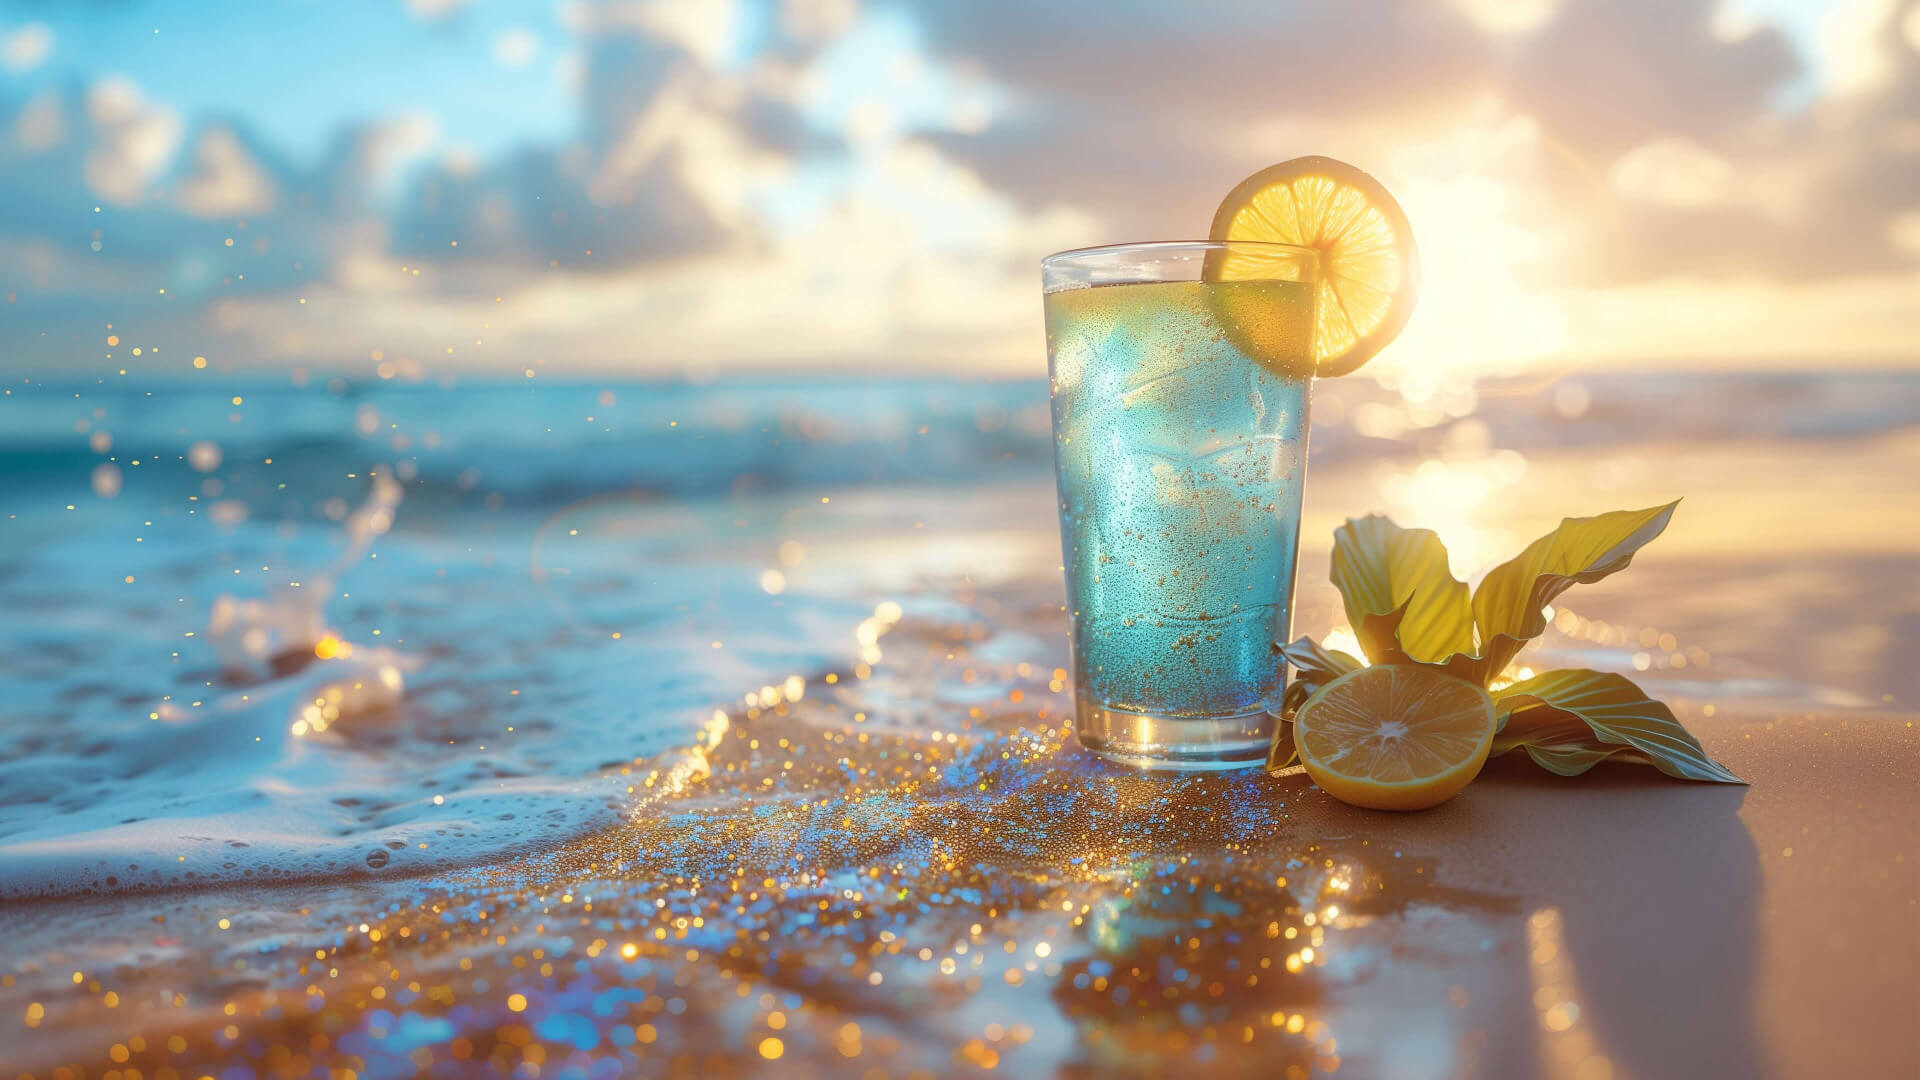 Cold drink on the ocean shore wallpaper 1366x768